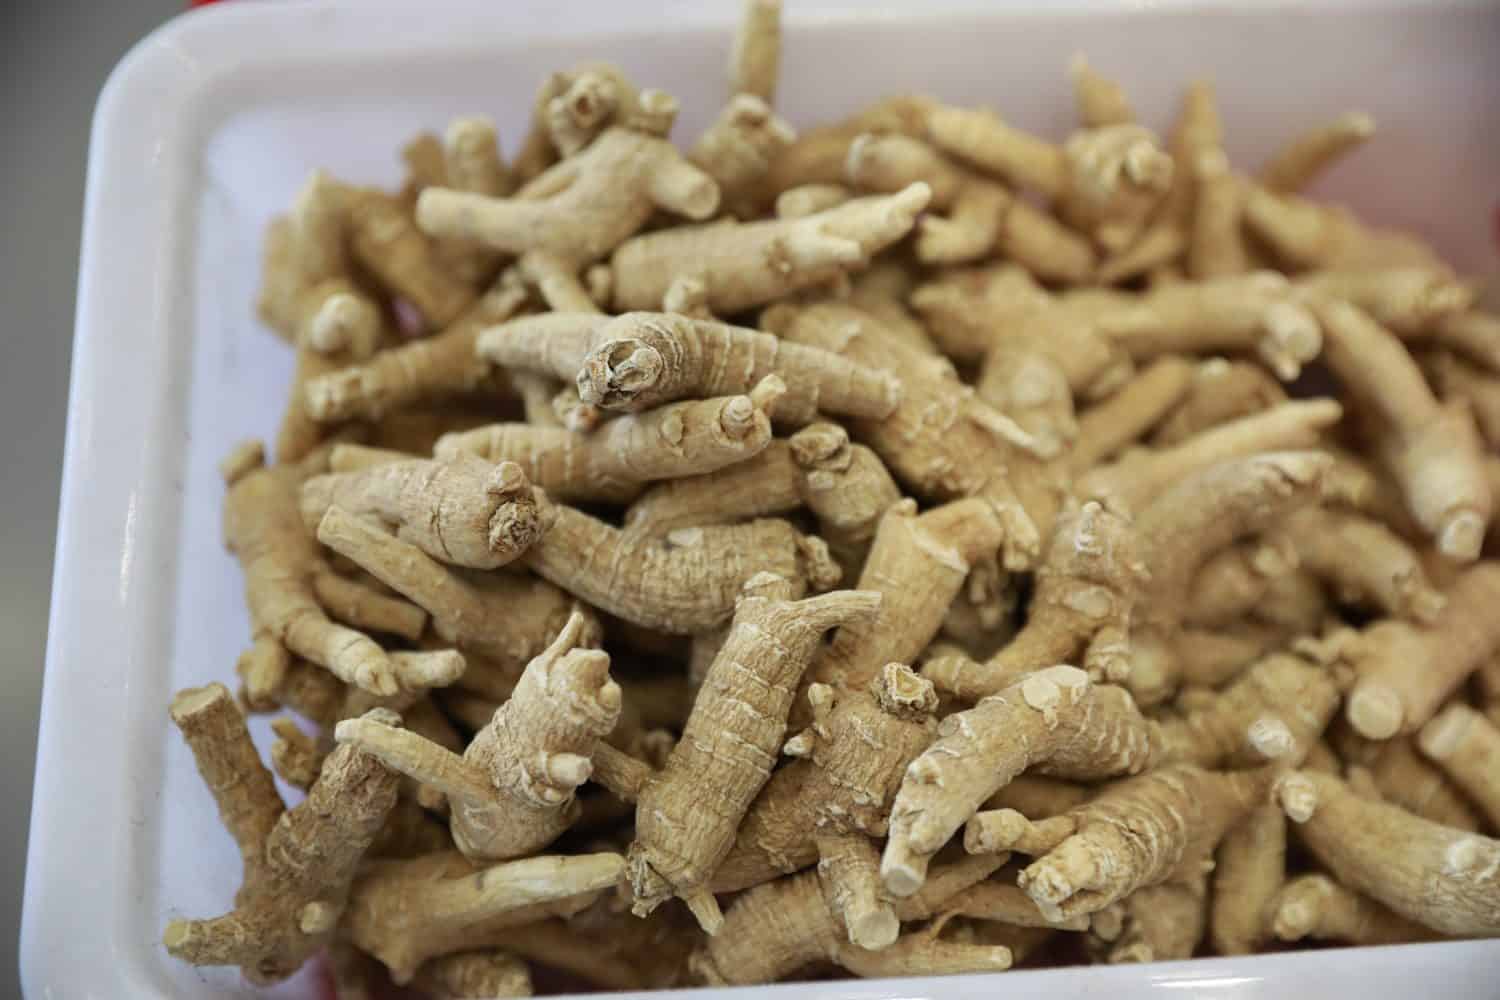 American ginseng is a traditional Chinese medicine.